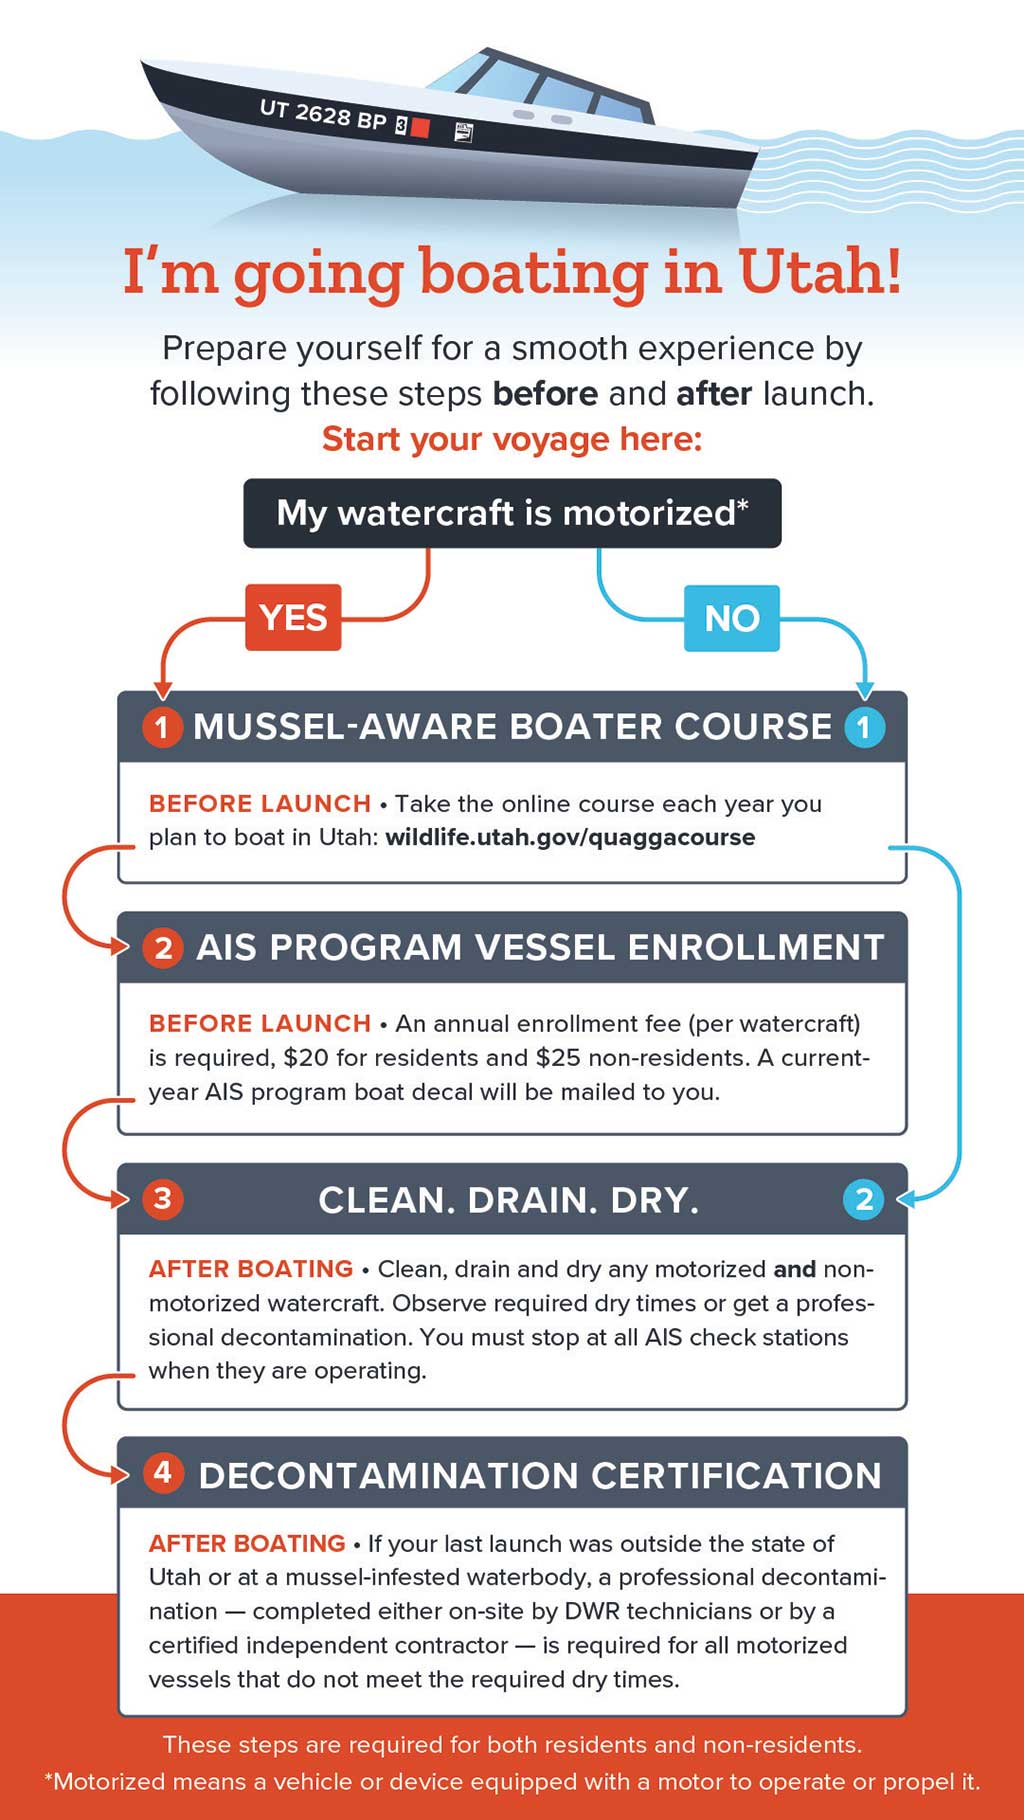 I'm going boating in Utah! Prepare yourself for a smooth experience by following these steps before and after launch.